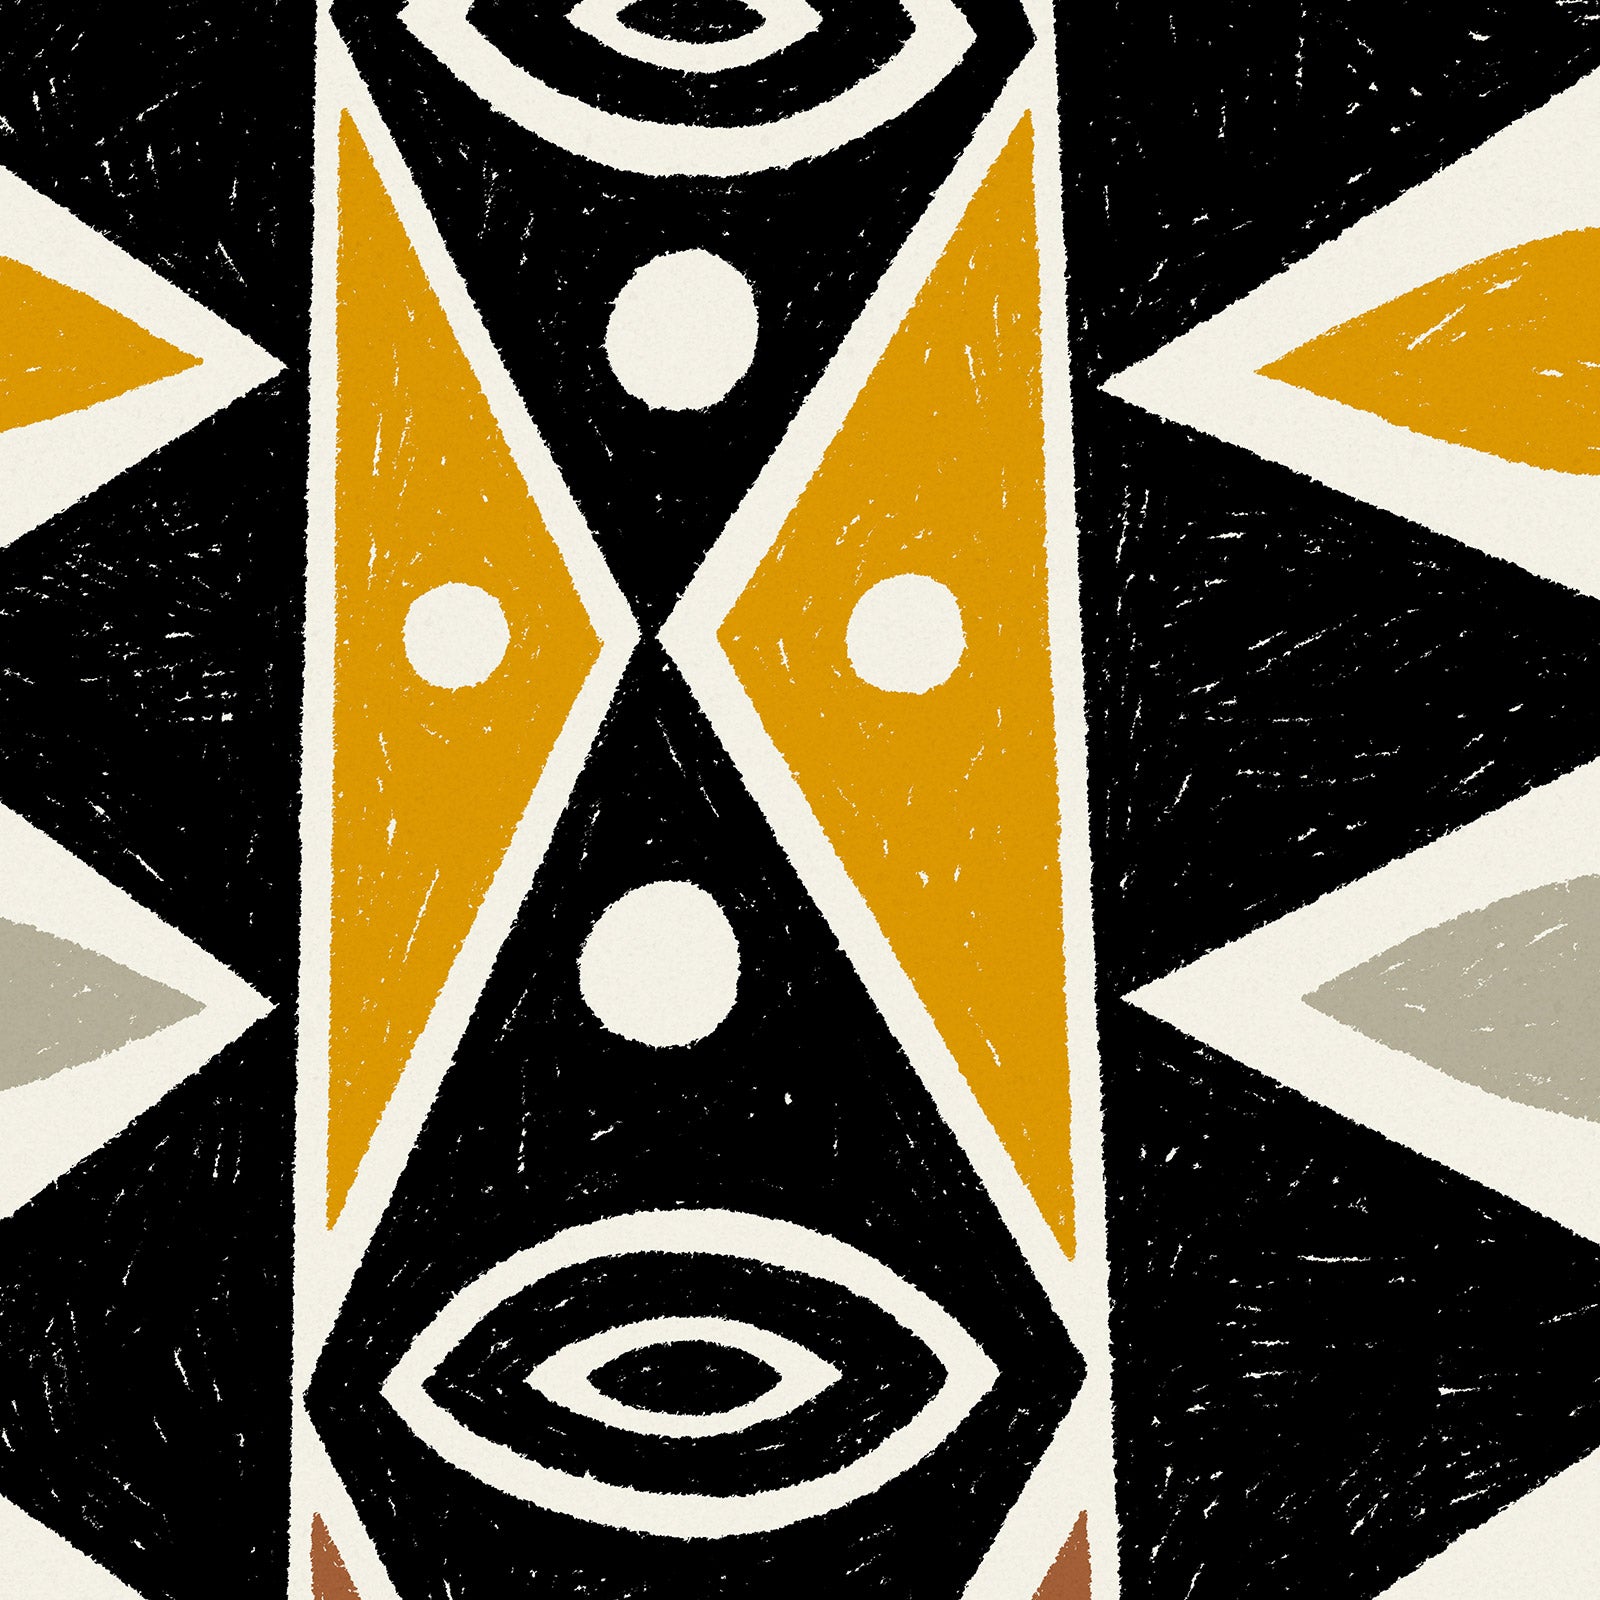 Black and earth colored totem inspired by mid-century design. Bamboo art print by Erik Abel